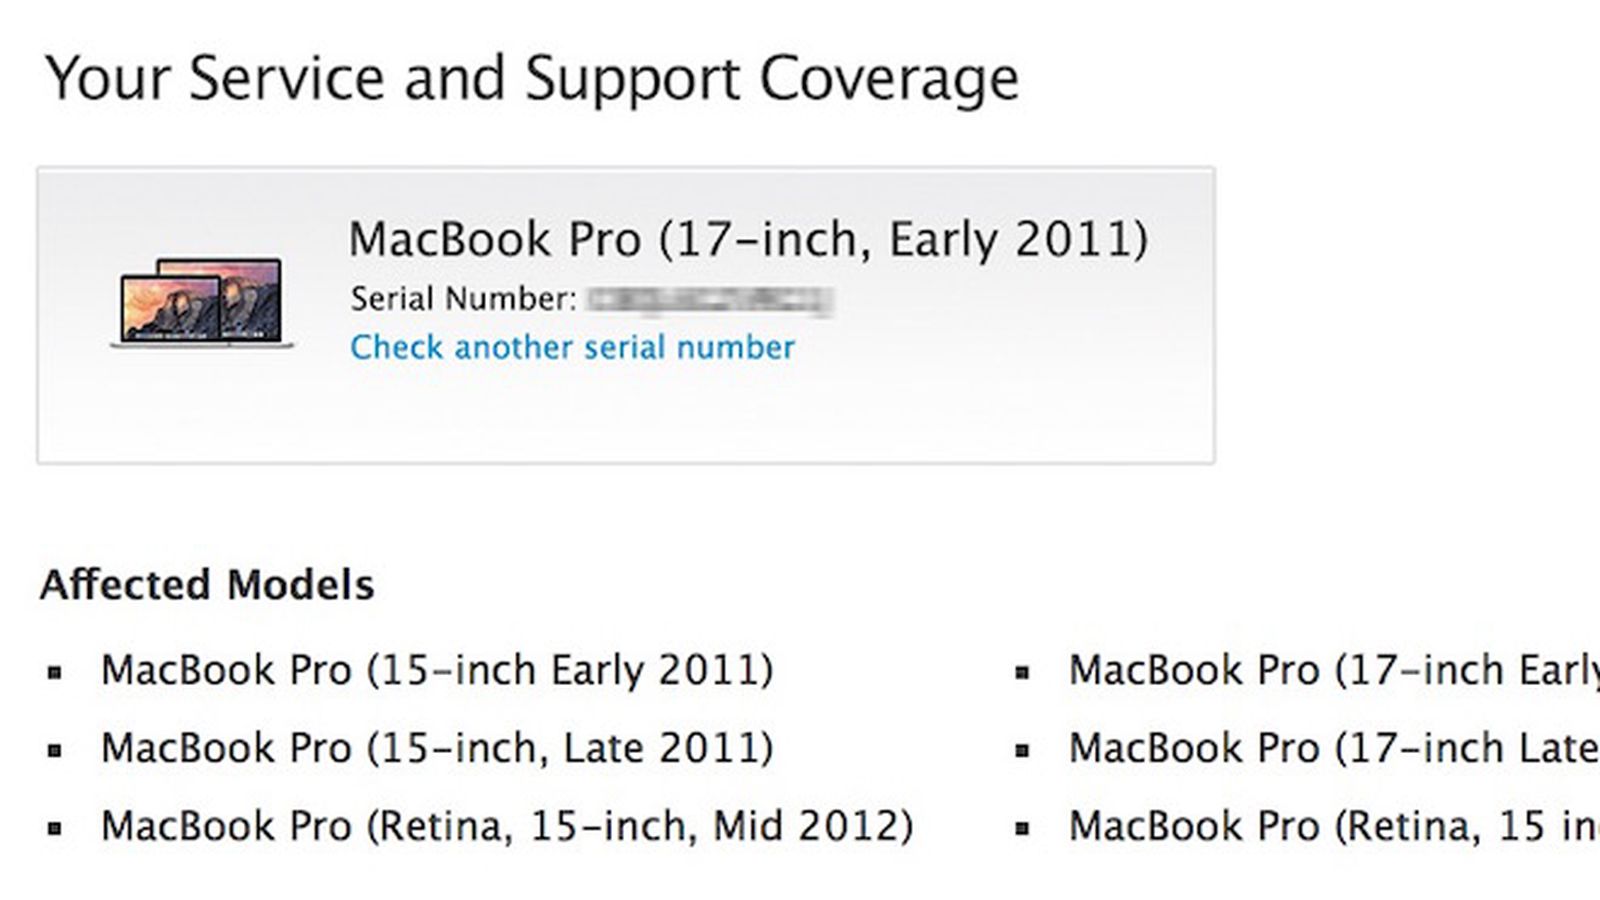 whats the model number for mac pro in mid 2012